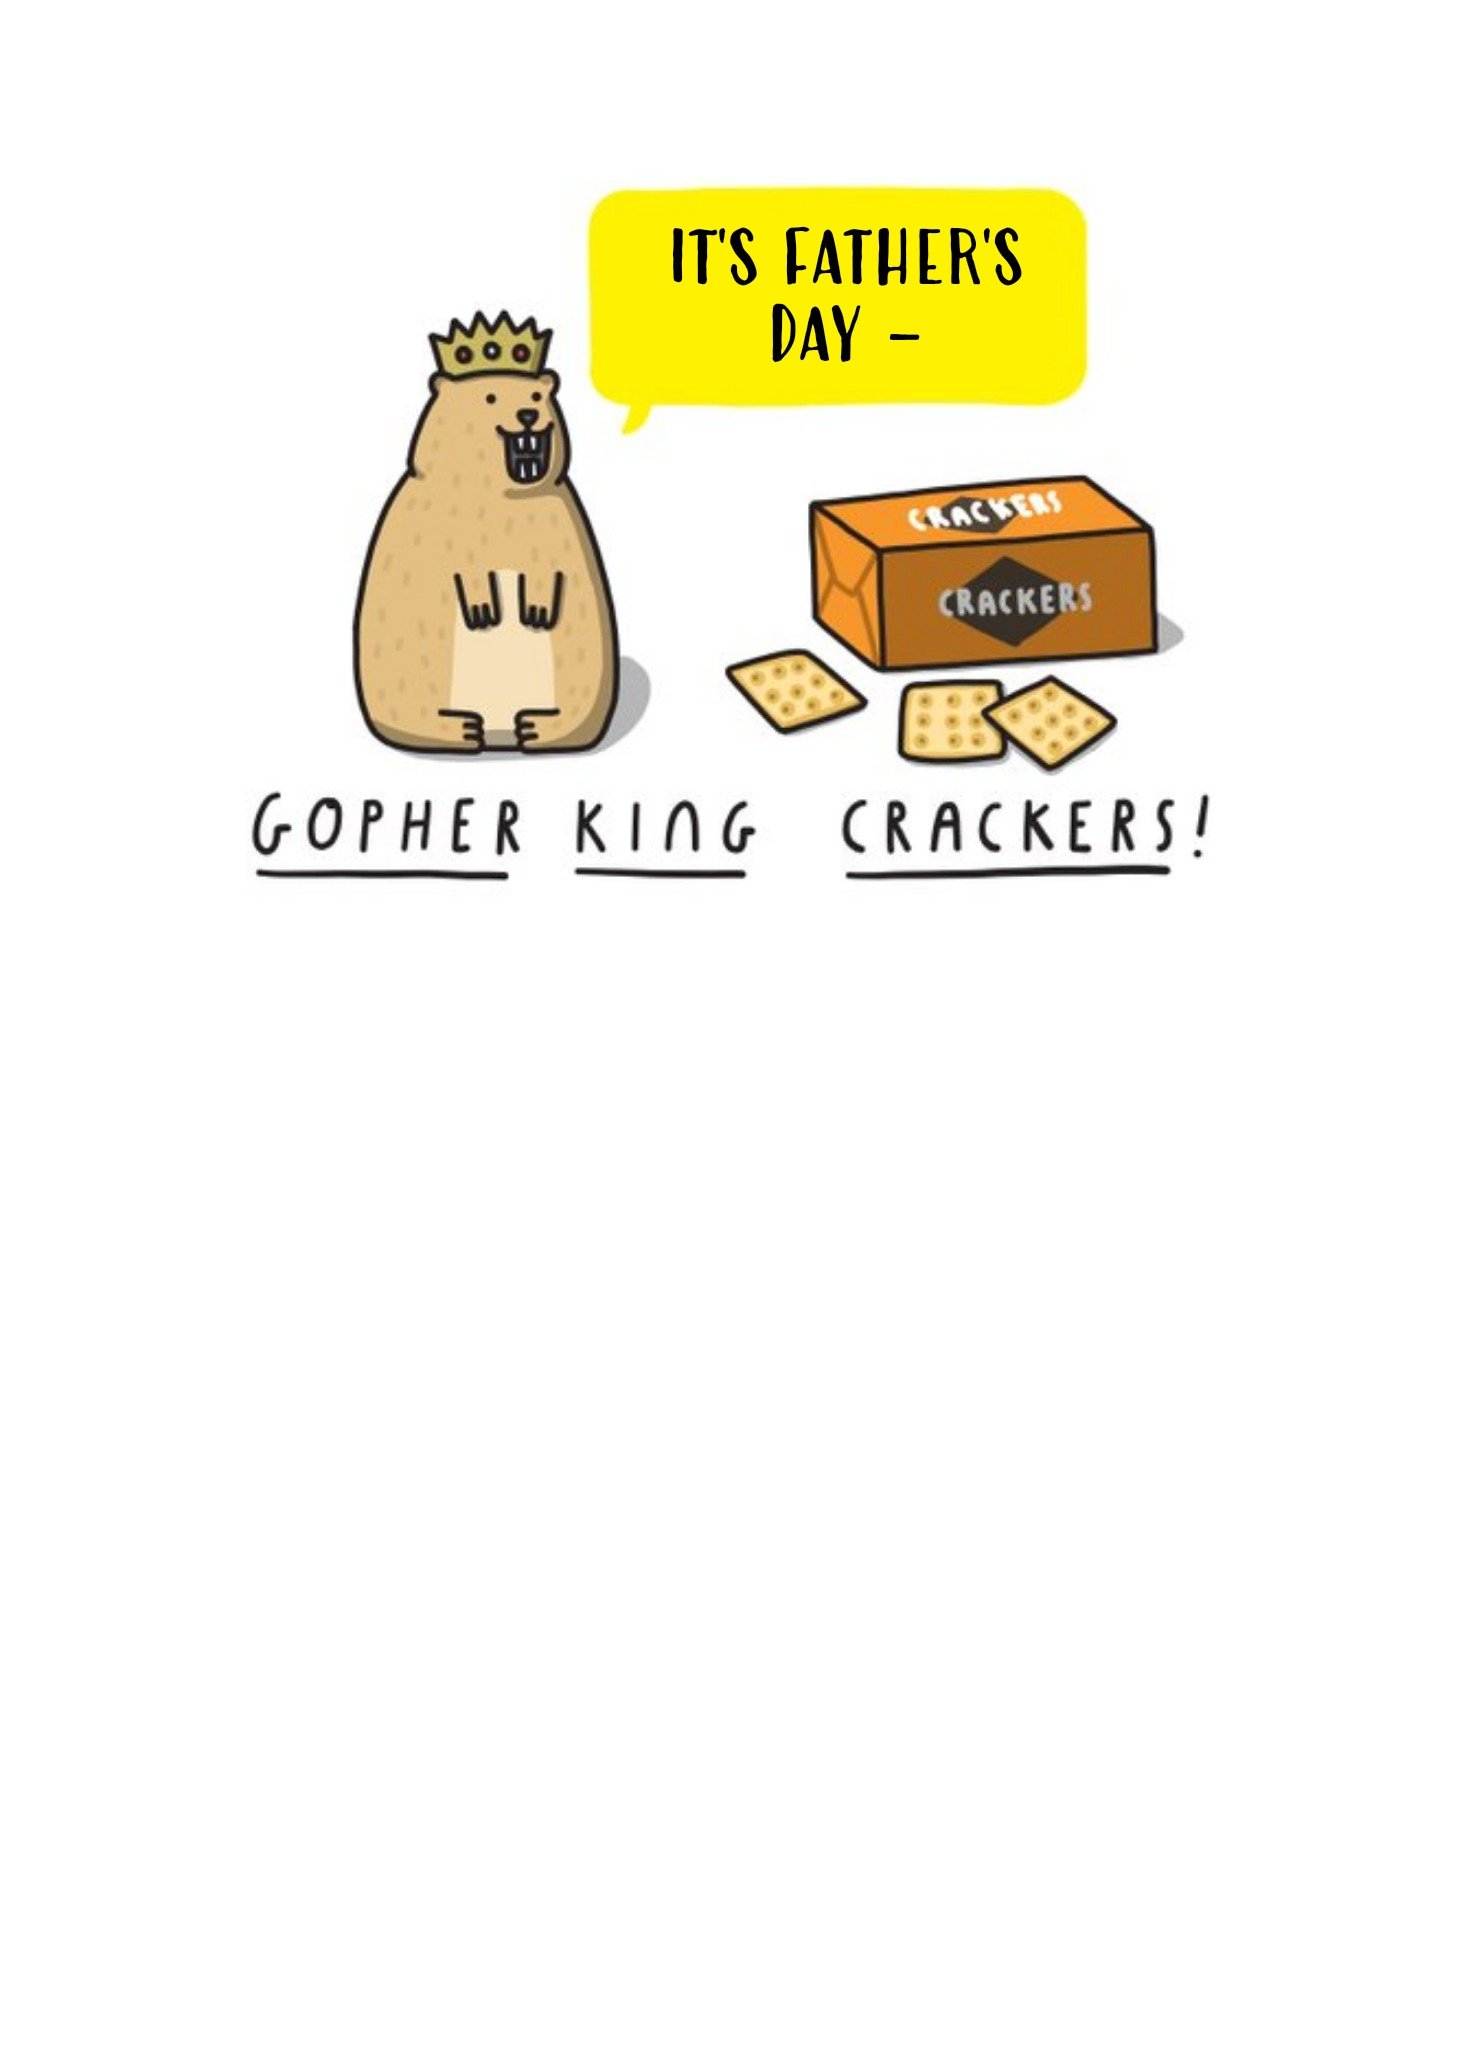 Moonpig Gopher King Crackers Funny Fathers Day Card Ecard